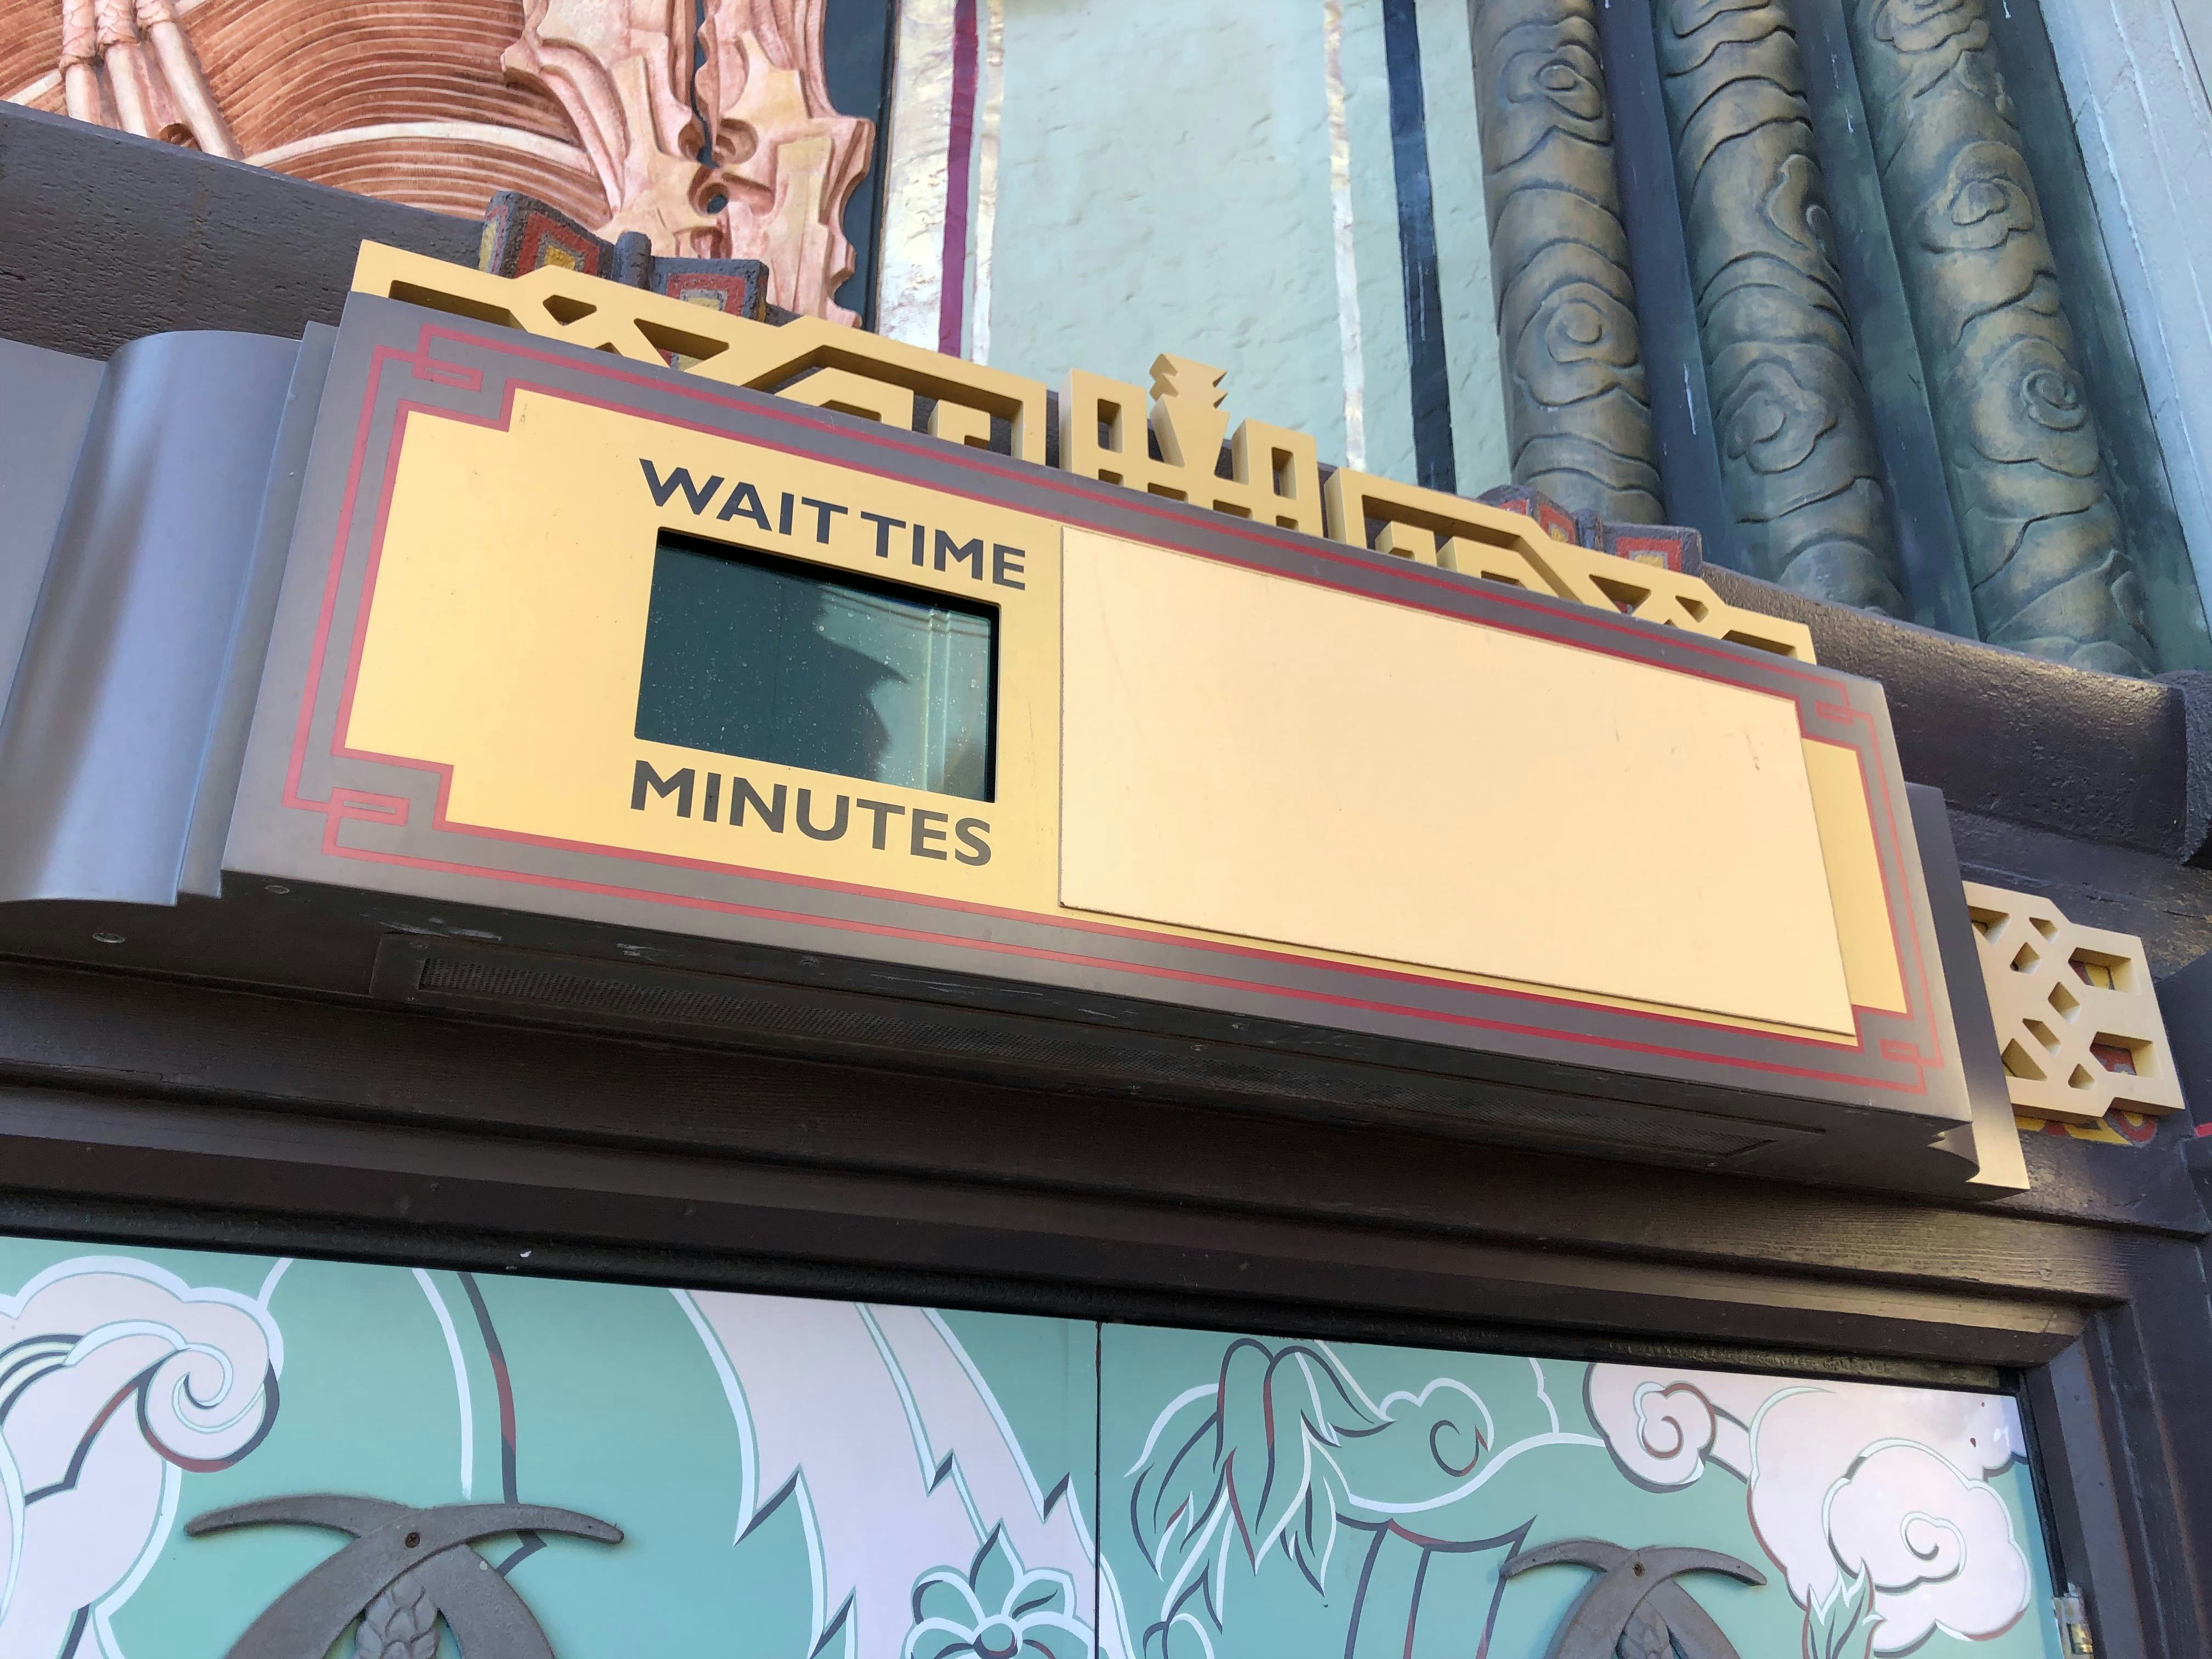 chinese theatre mickey and minnies runaway railway wait times and exit signs jan 2020 7.jpg?auto=compress%2Cformat&ixlib=php 1.2